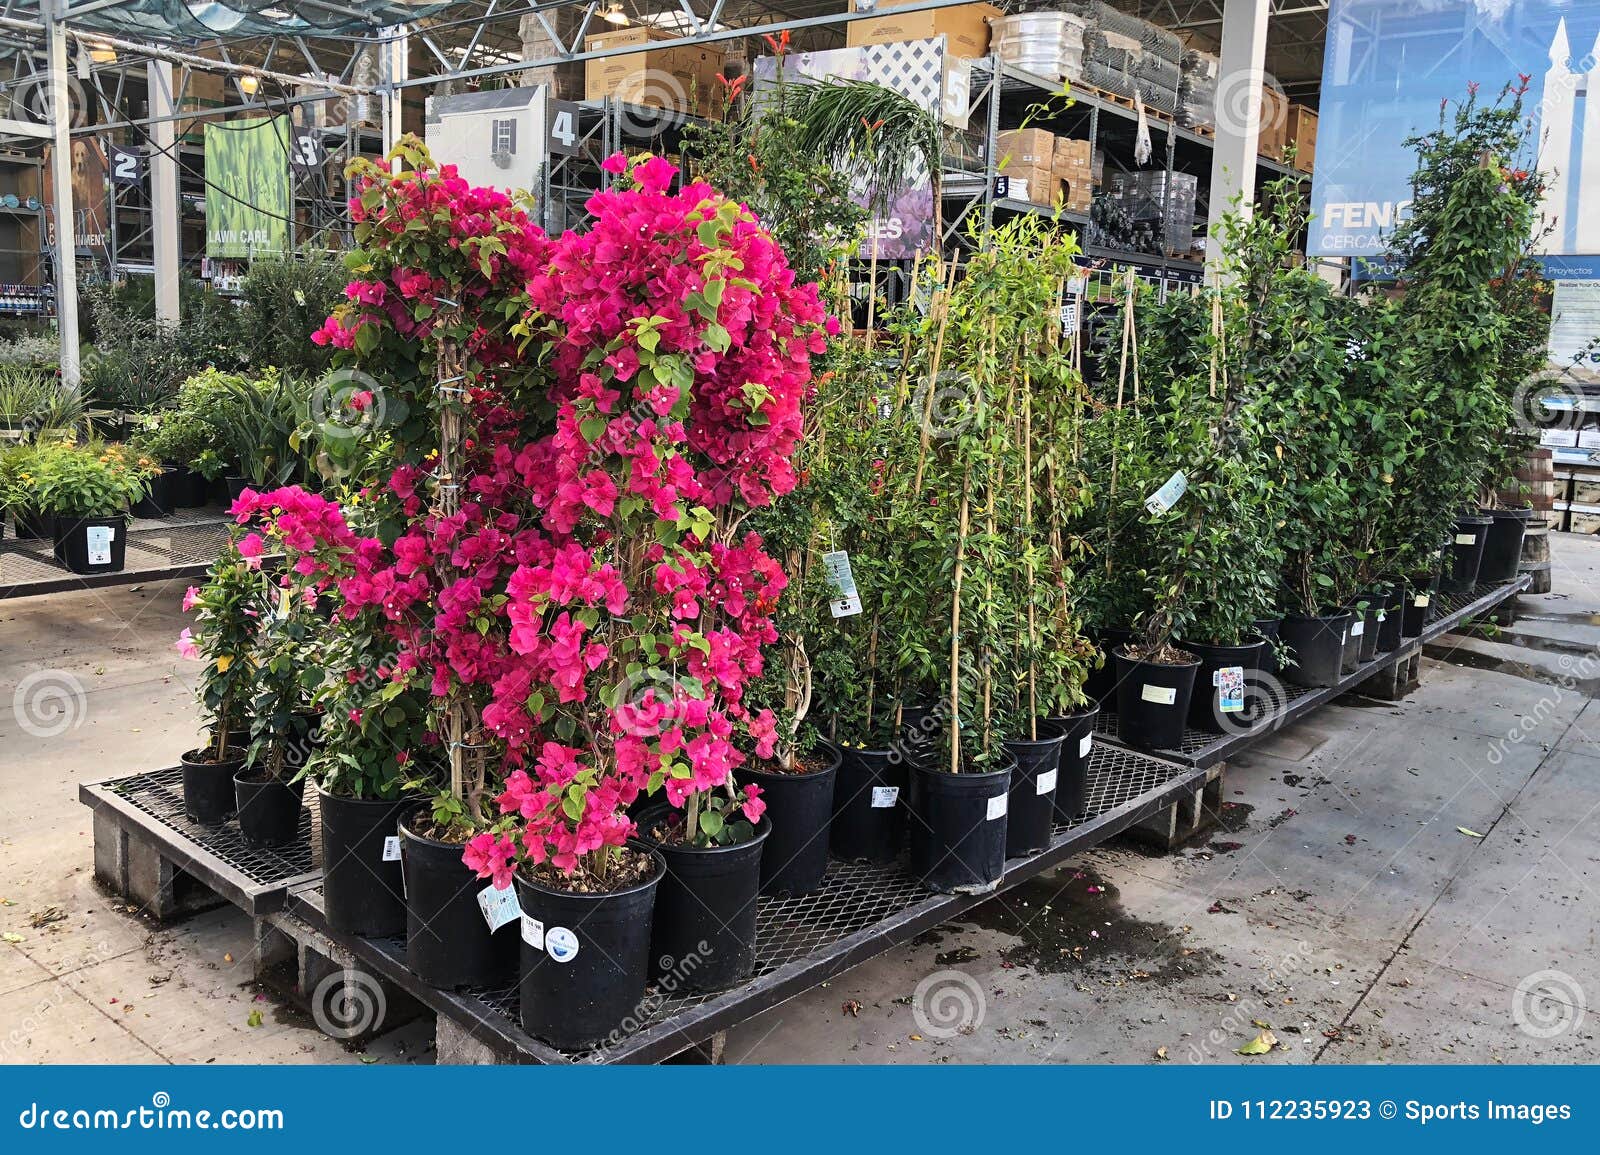 Flowers For Sale At Lowes Garden Center Editorial Stock Photo